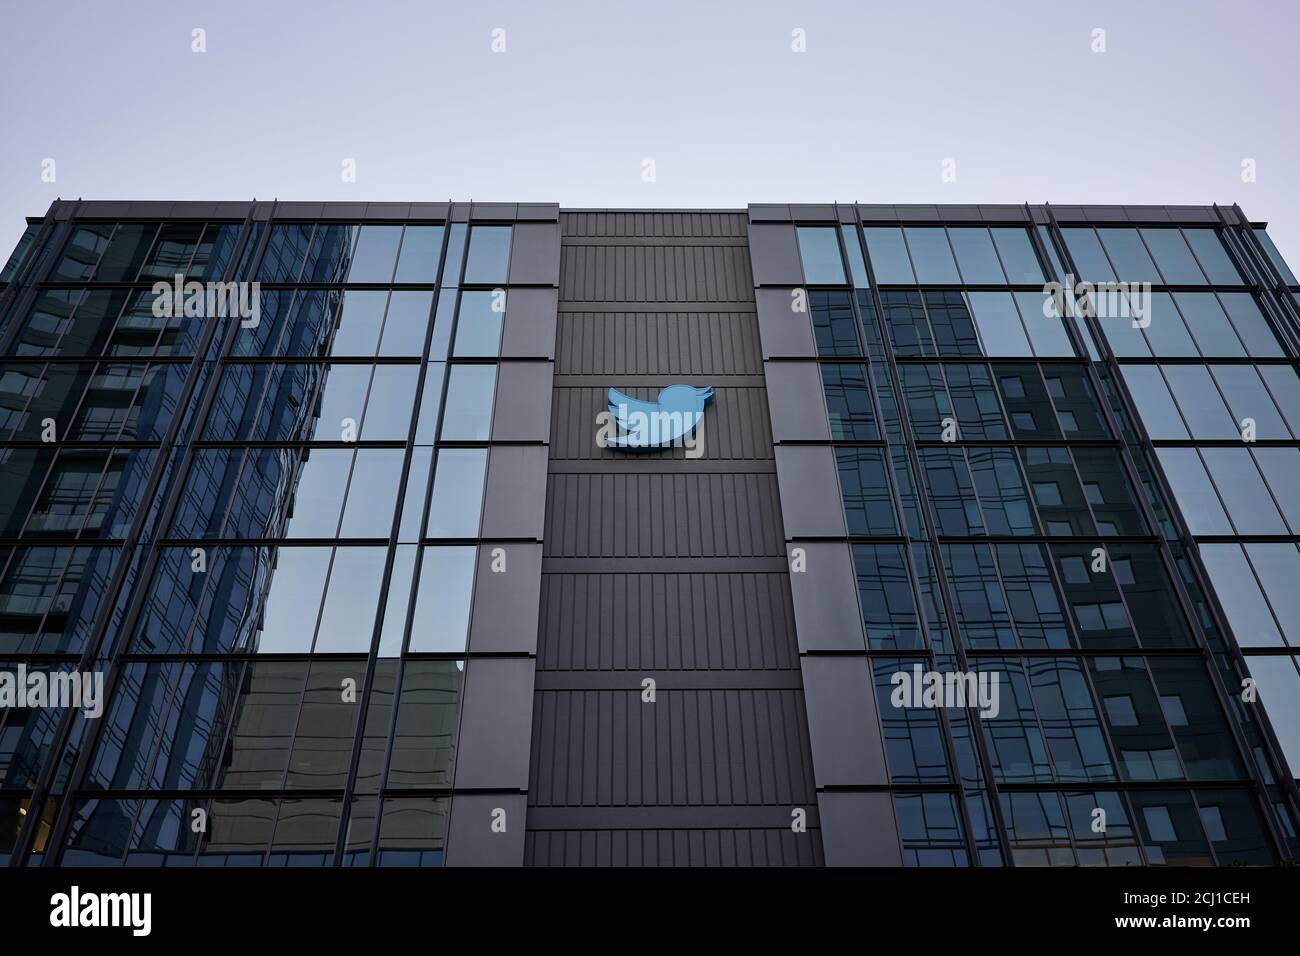 The Twitter logo is seen at the American social networking service company Twitter's Headquarters in San Francisco, California, in the evening. Stock Photo